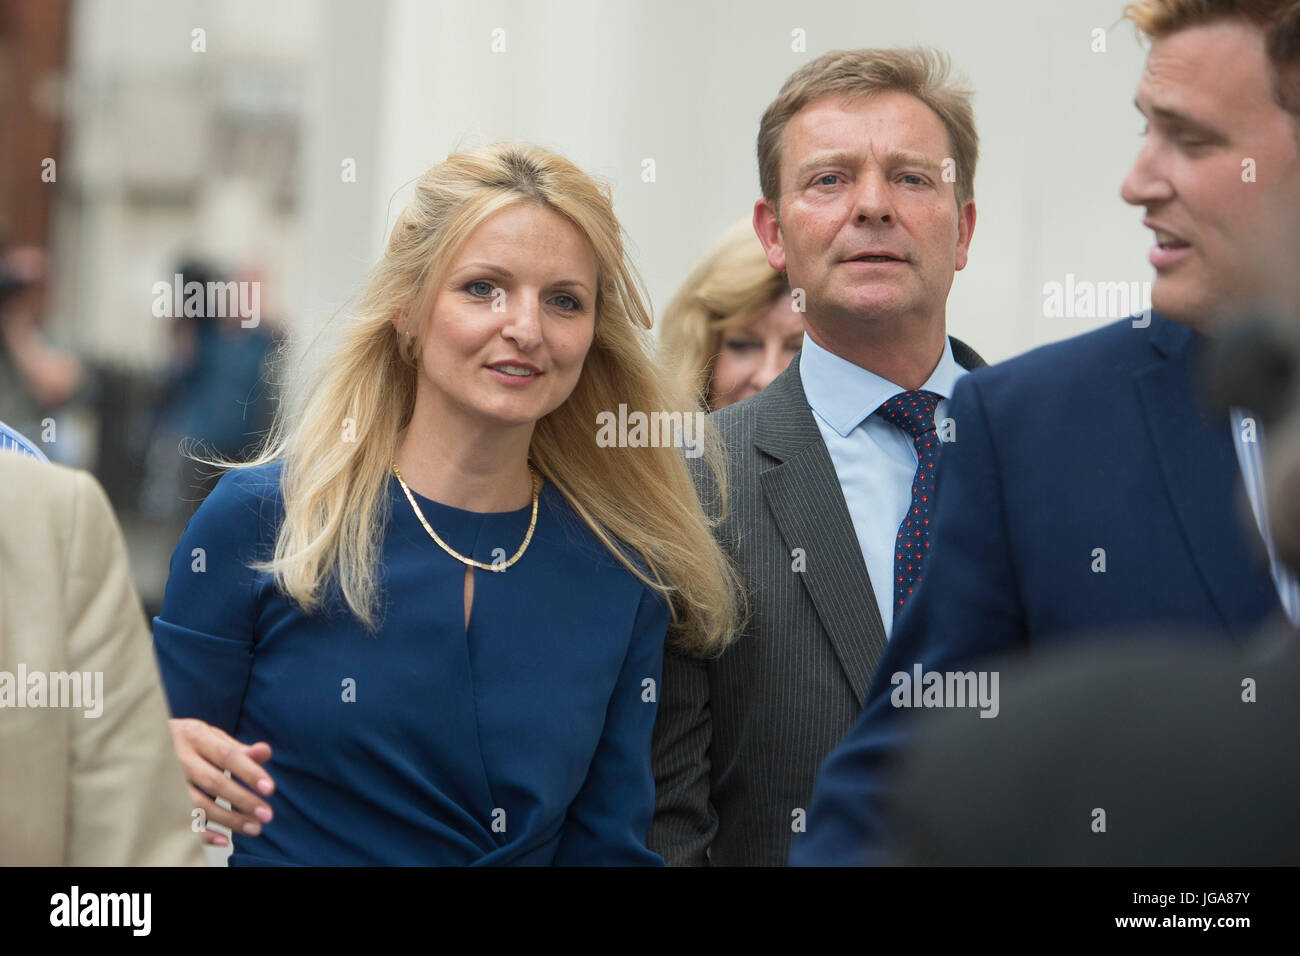 Conservative MP Craig Mackinlay, with his wife Kati Mackinlay, leave ...